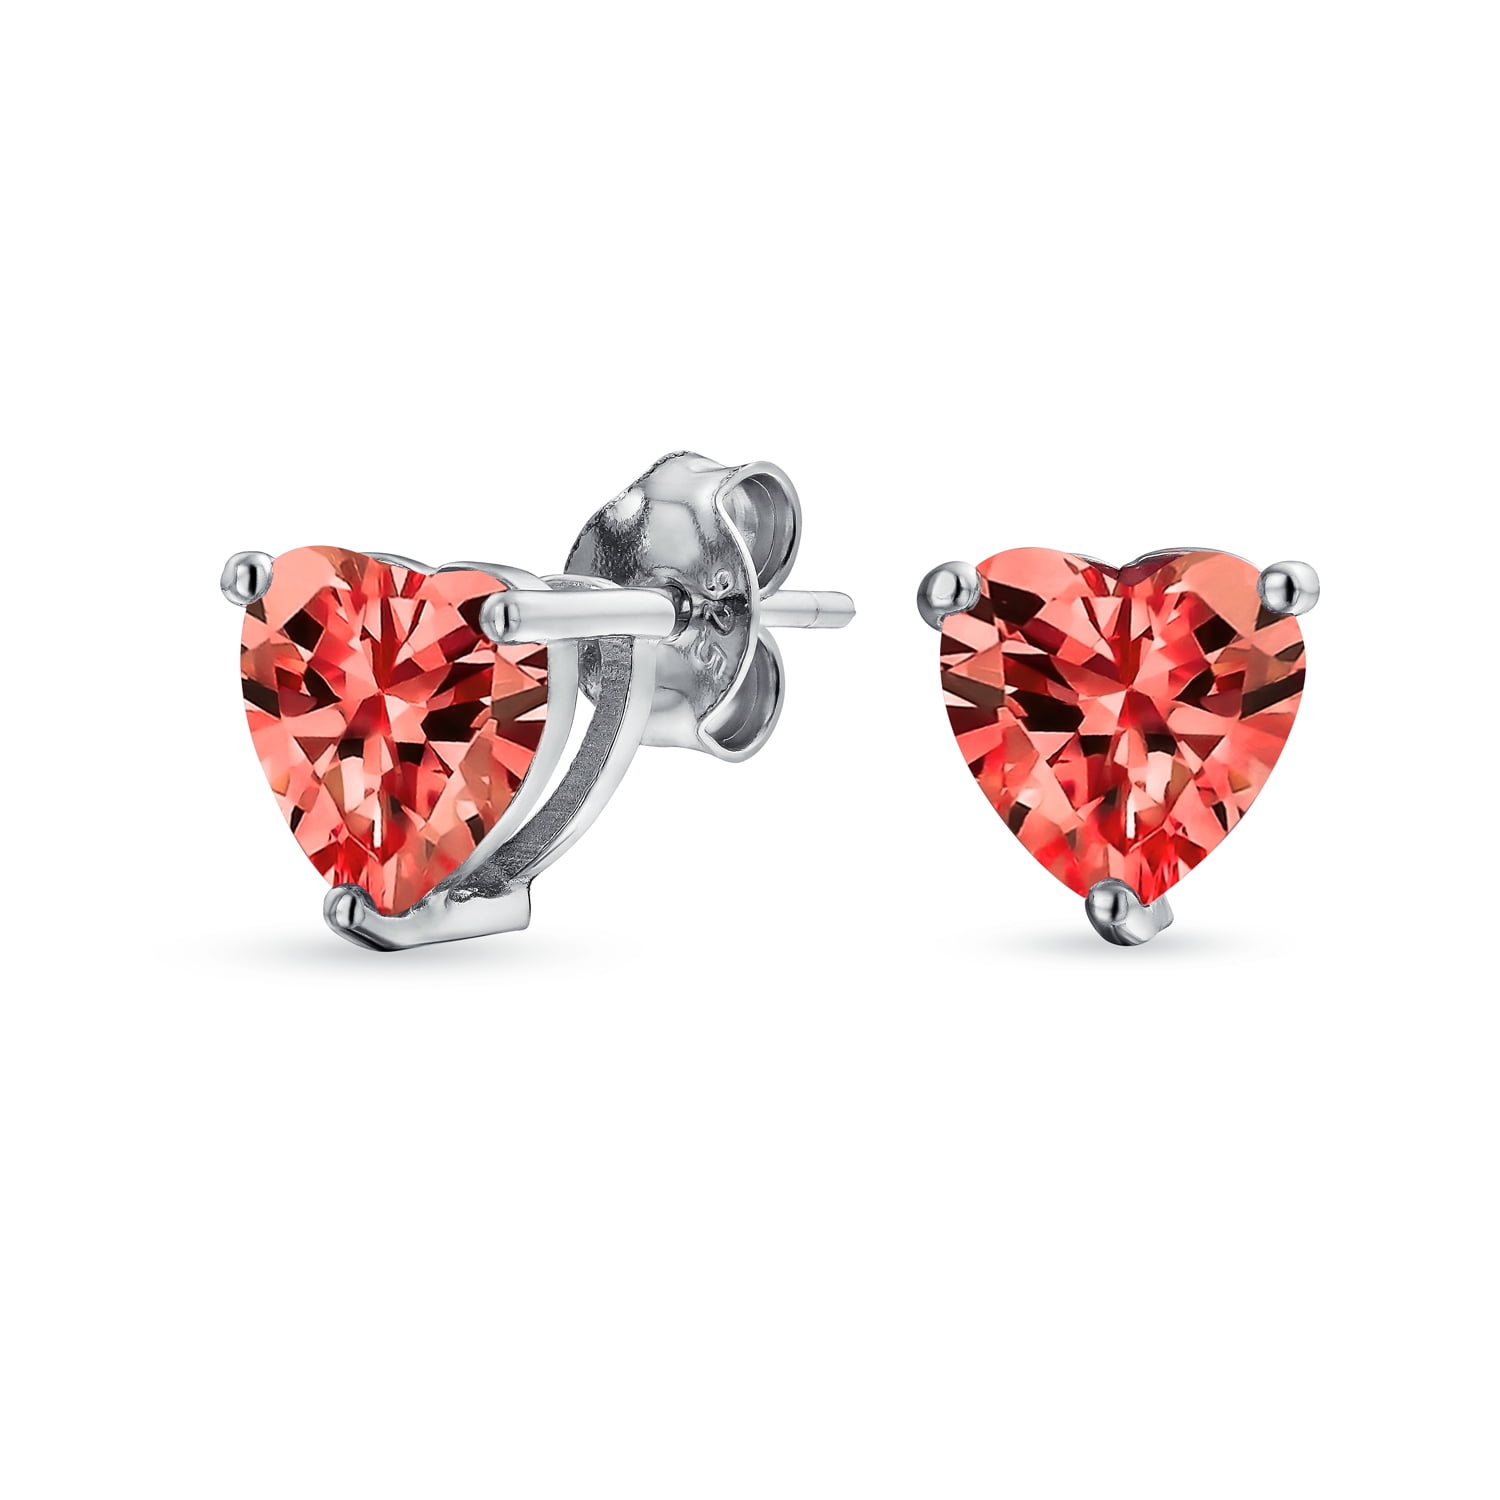 Frog Earrings Round Simulated Pink Black Cubic Zirconia 925 Sterling Silver Frog Stud